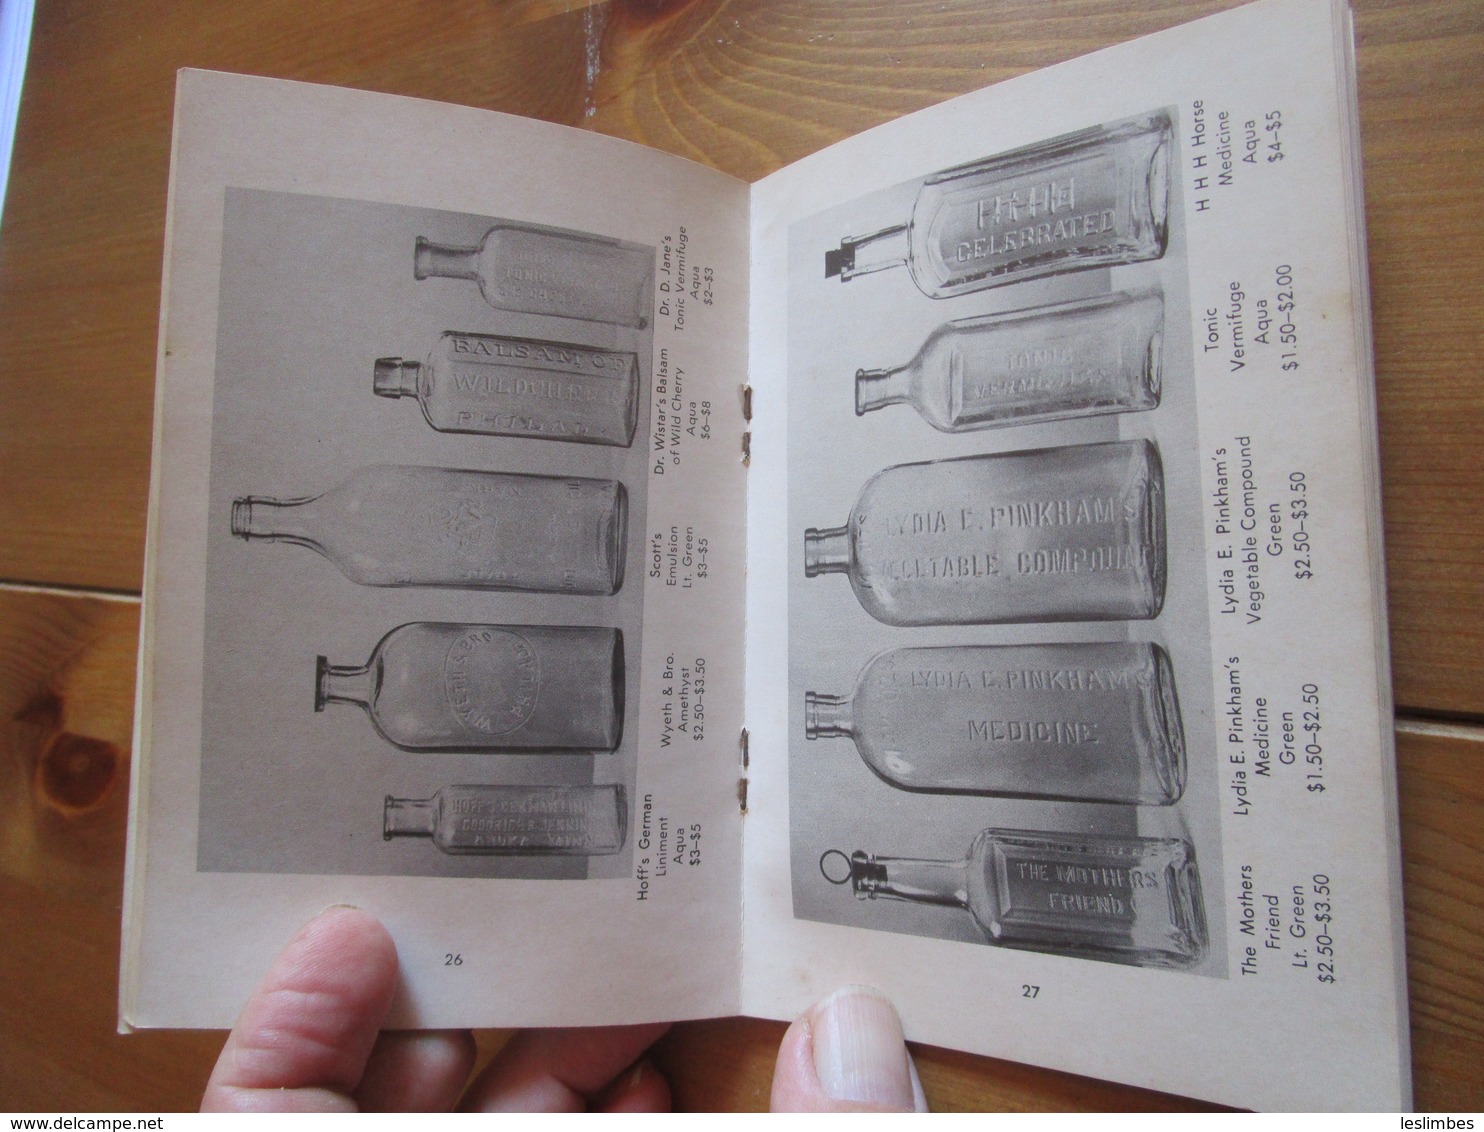 Pocket Field Guide For The Bottle Digger By Marvin And Helen Davis. Old Bottle Collecting Publications, 1968 - Themengebiet Sammeln